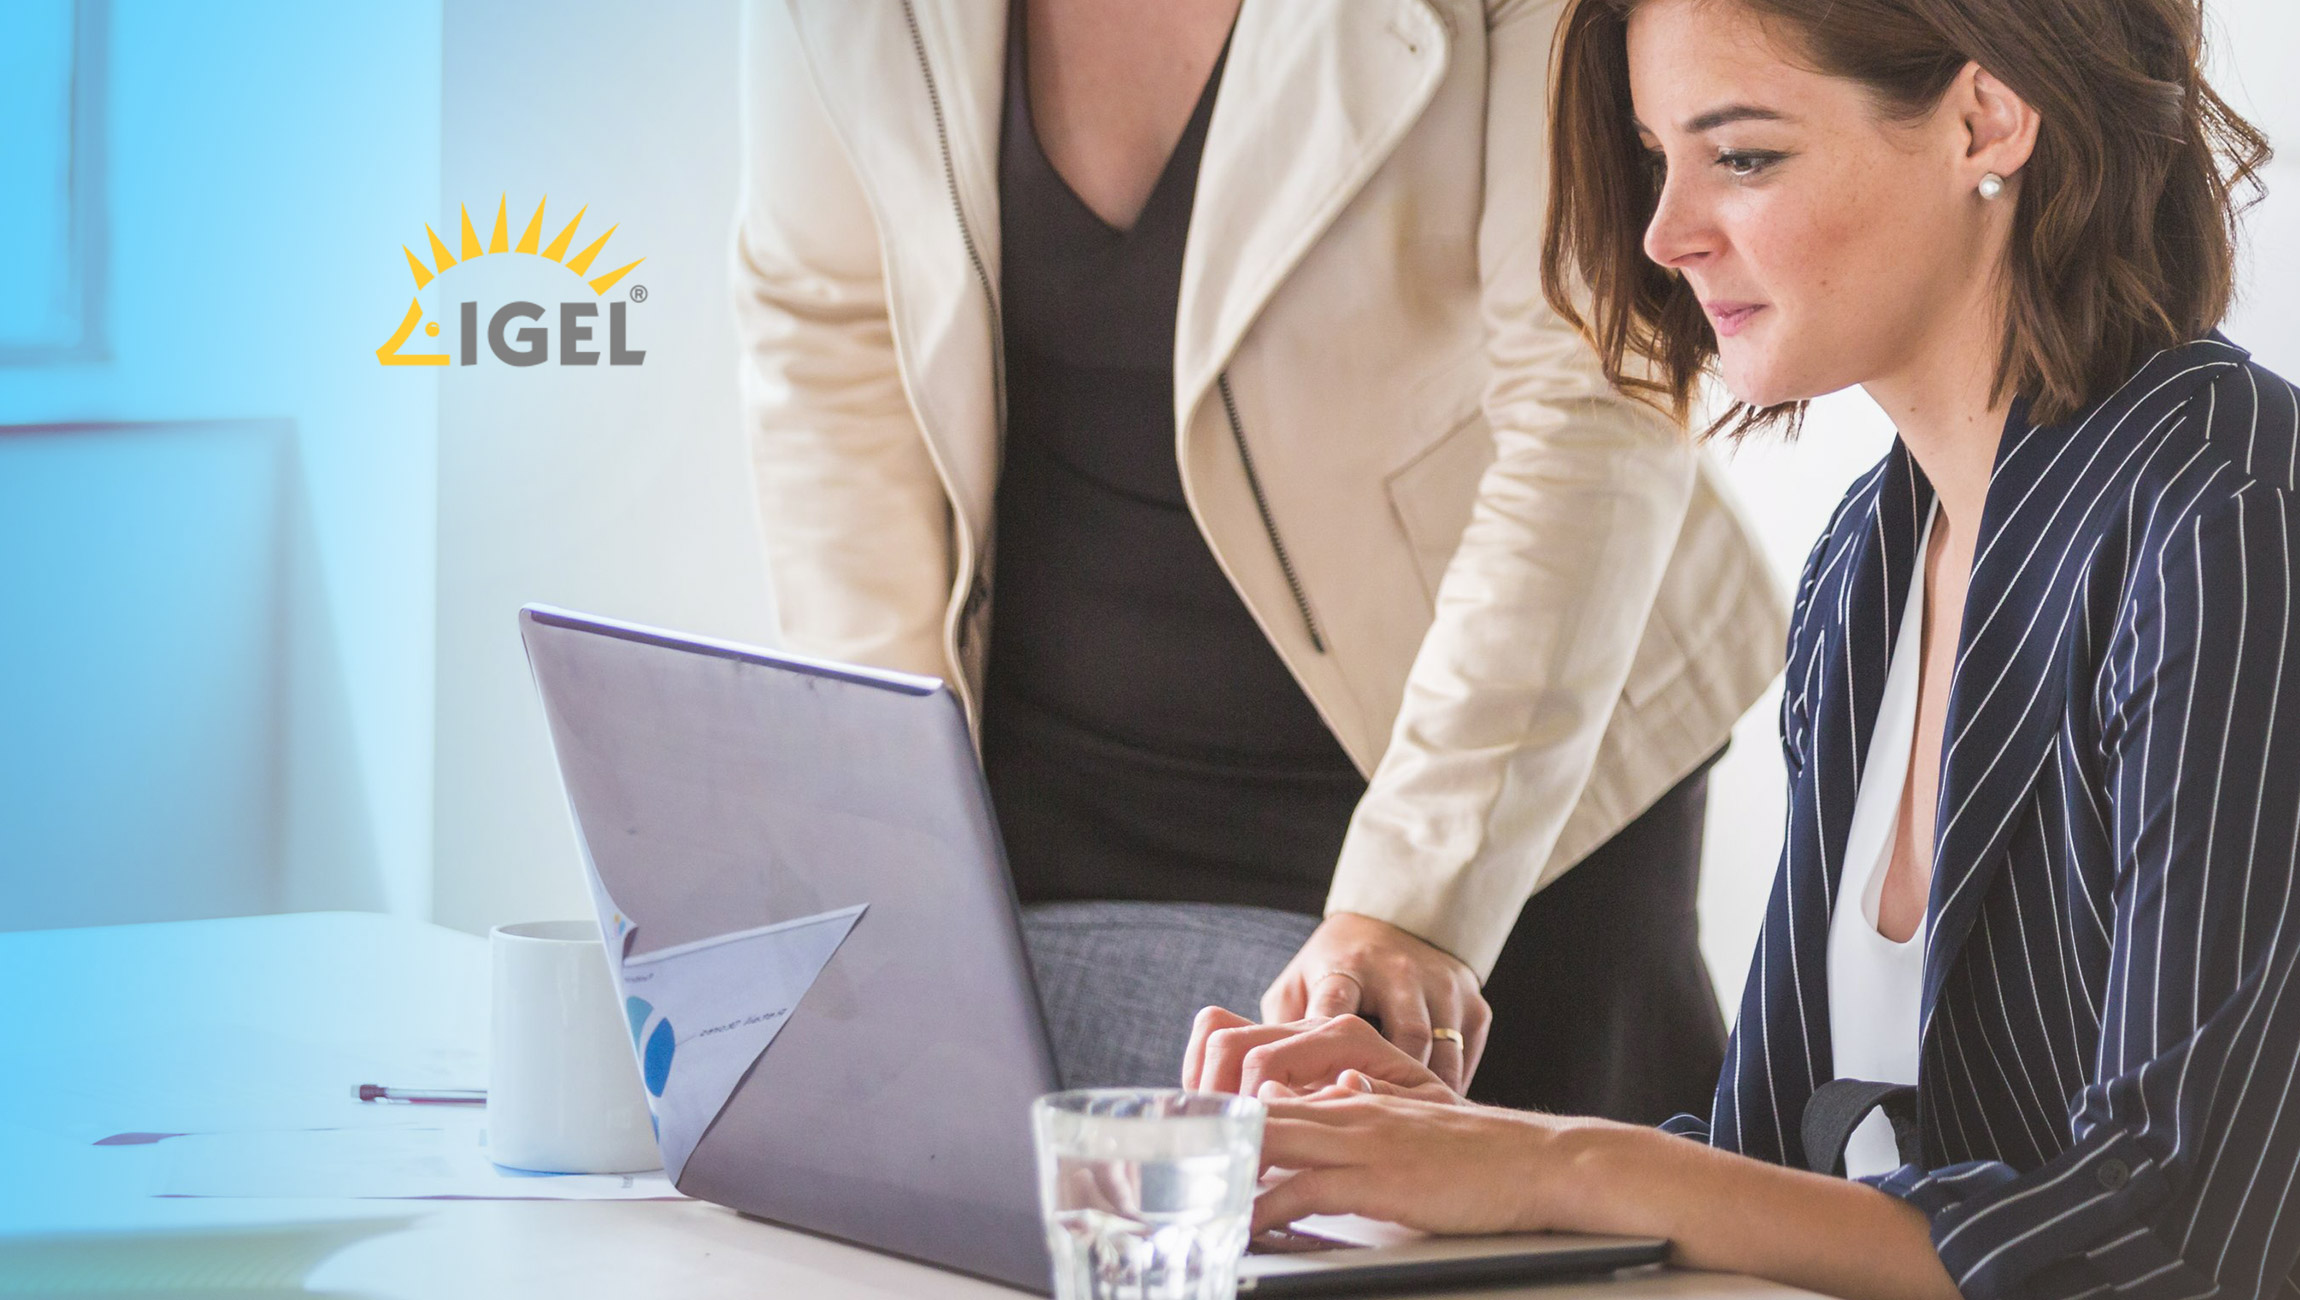 IGEL Teams Up with Zoom, Expands Support for Zoom Video Communications